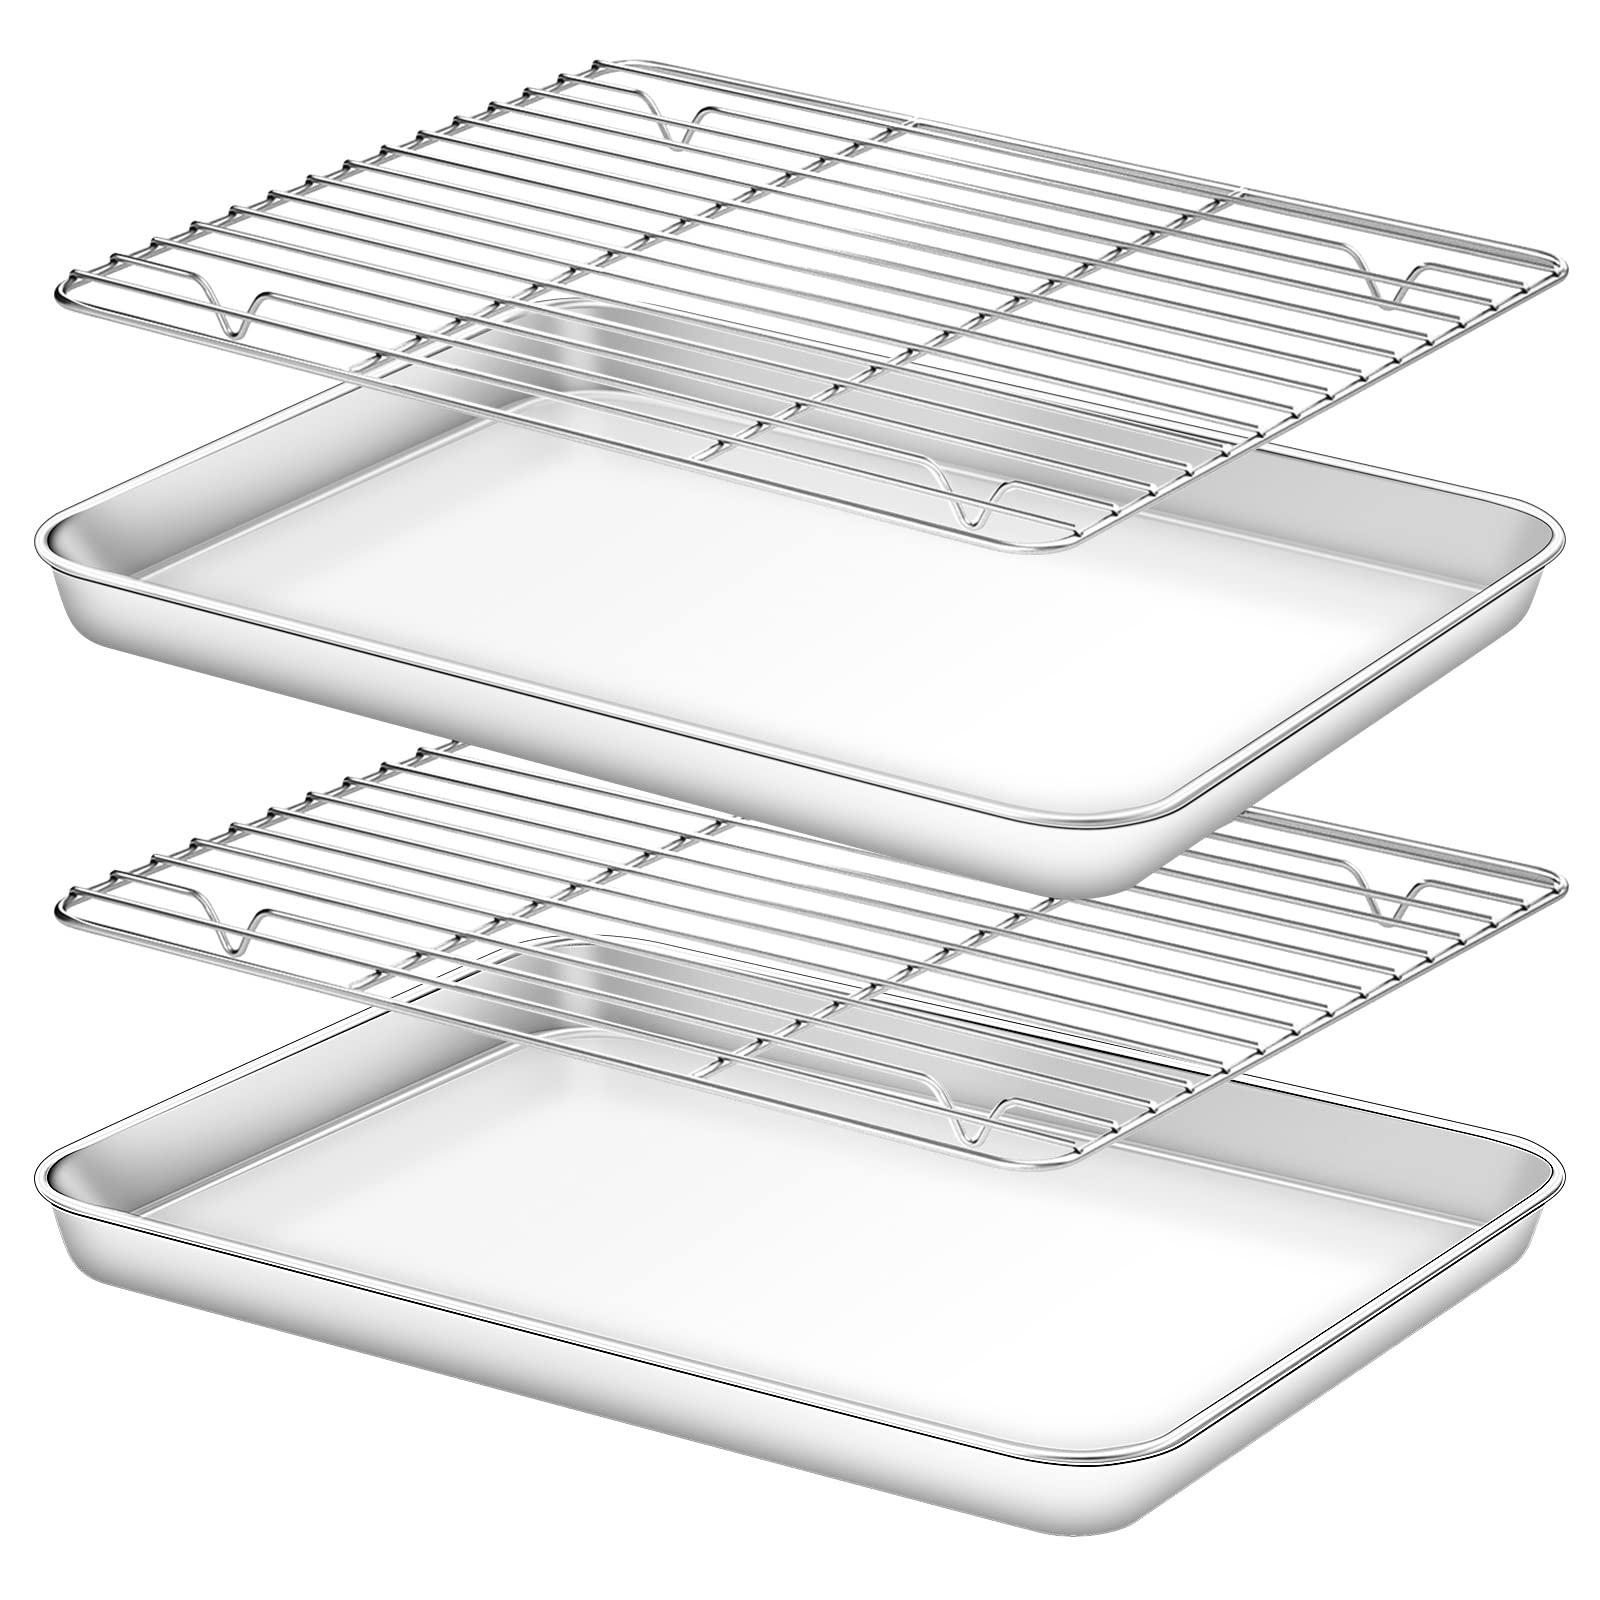 Deedro Baking Sheet with Rack Set [2 Sheets + 2 Racks], Stainless Steel Cookie Half Sheets Baking Pan Oven Tray with Cooling Rack, 12 x 10 x 1 Inch, Heavy Duty, Non-toxic, Easy Clean